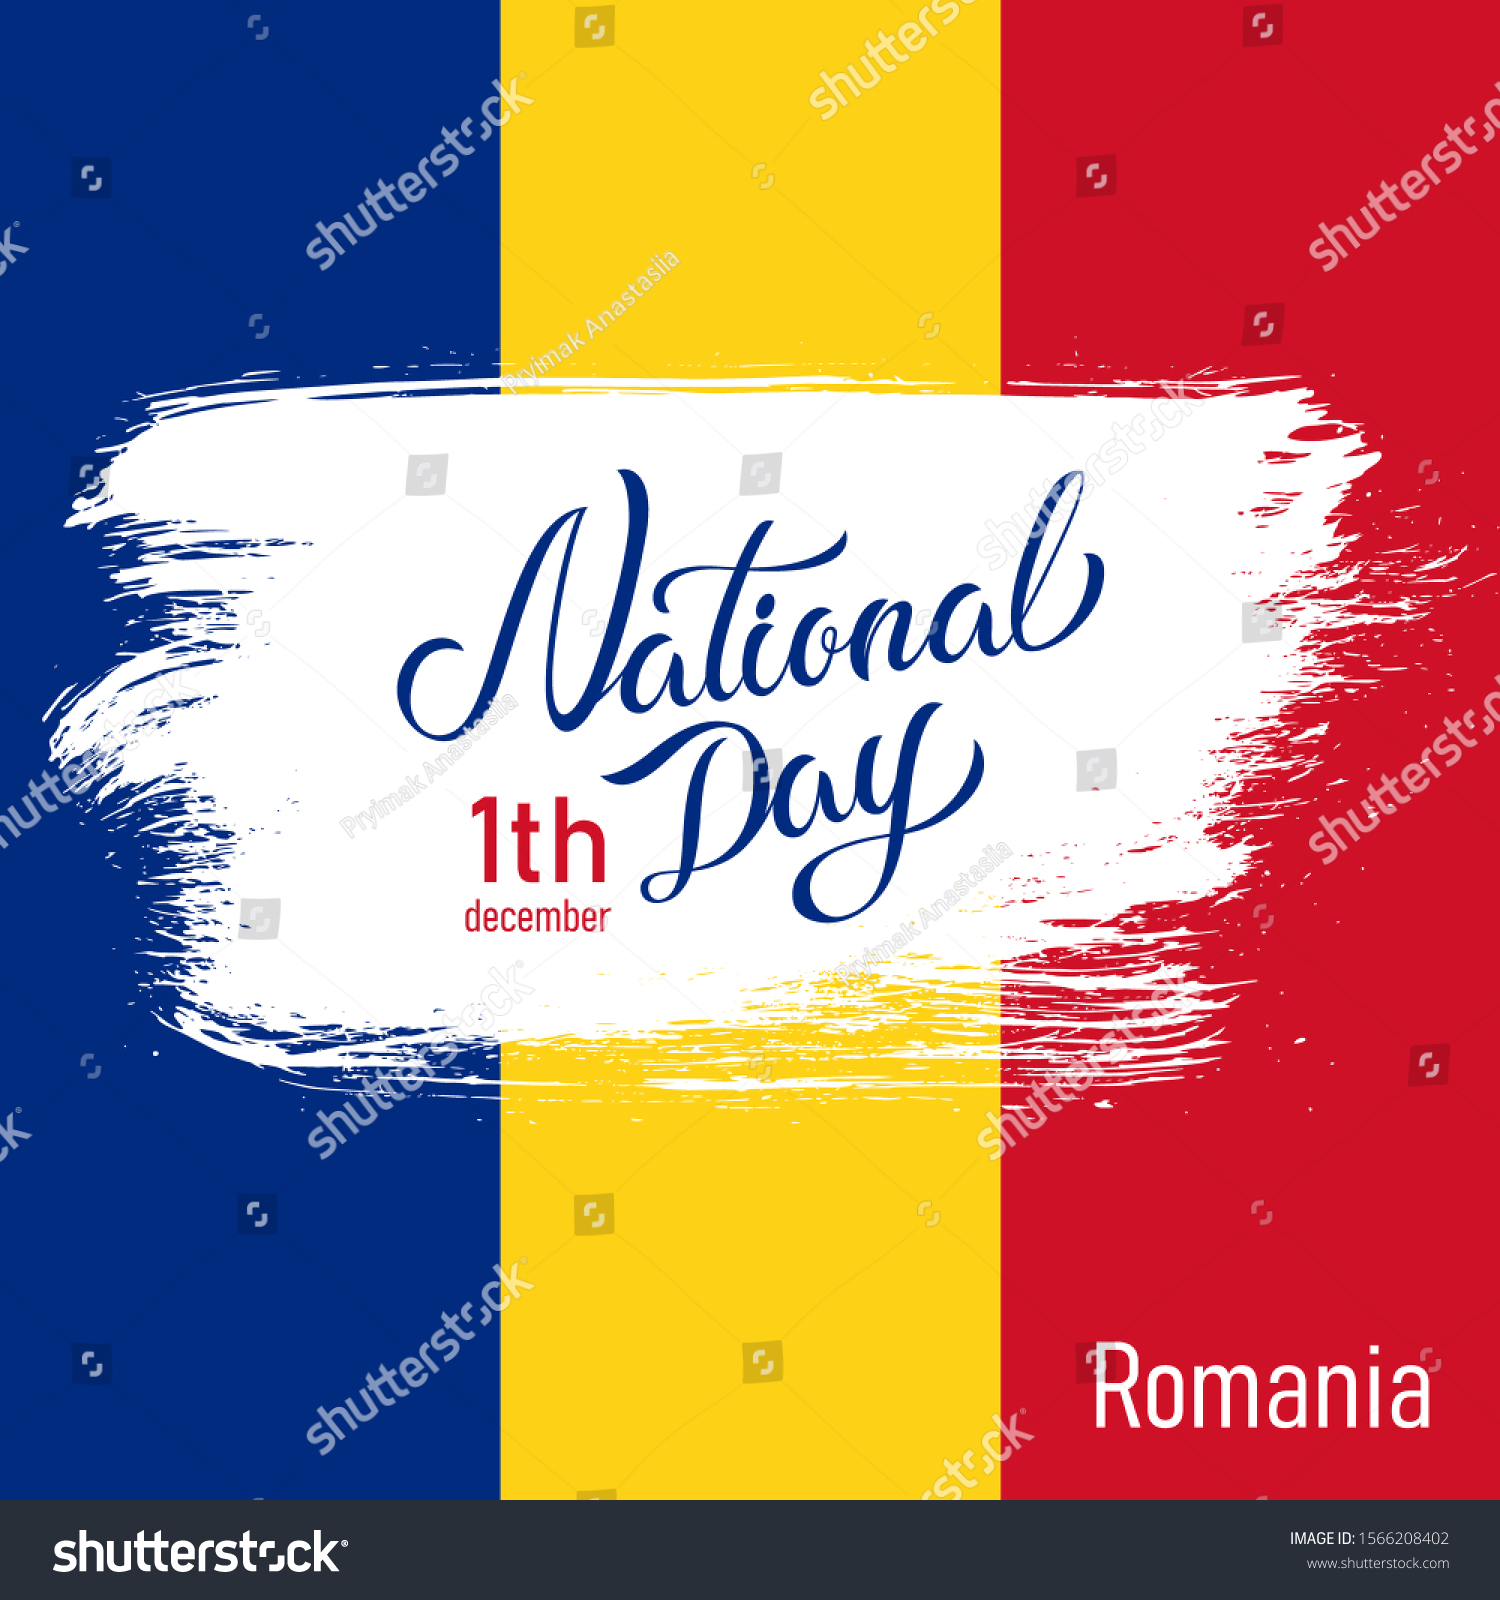 SVG of Happy Romania Nationl Day Vector Design Template Illustration svg